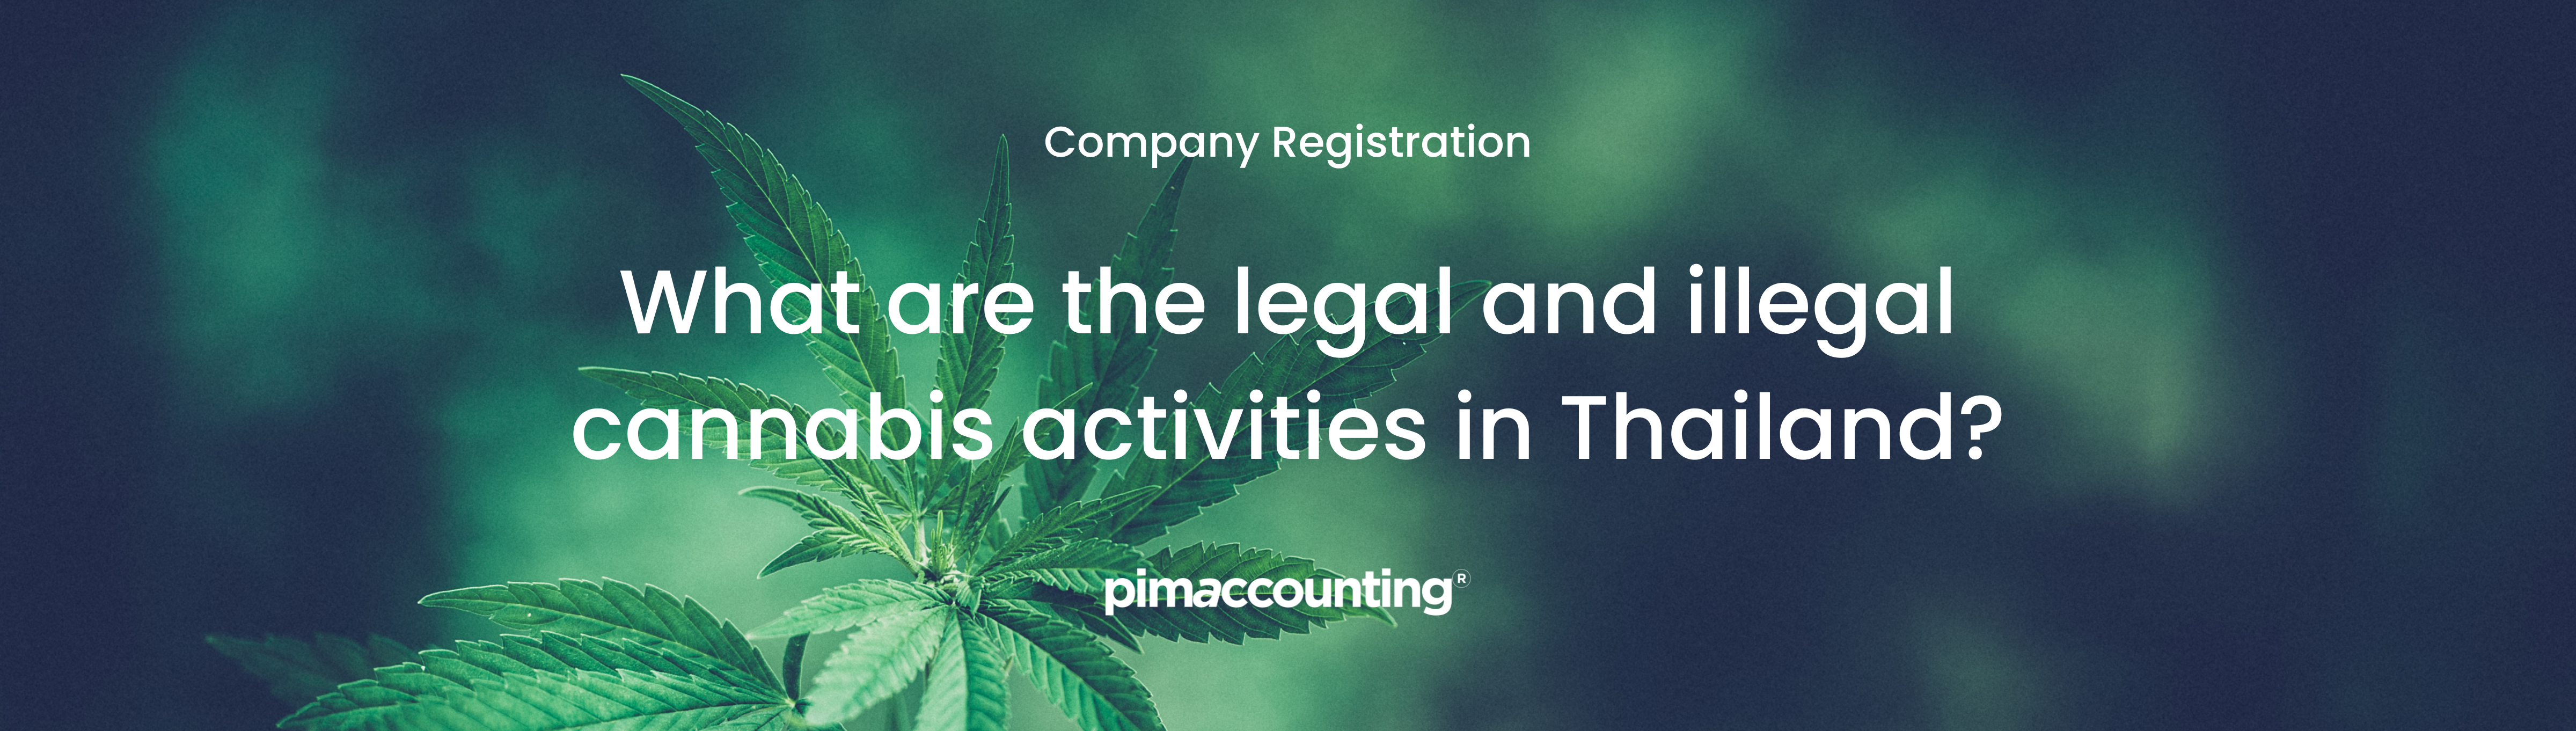  legal and illegal activities for the Cannabis business in Thailand?